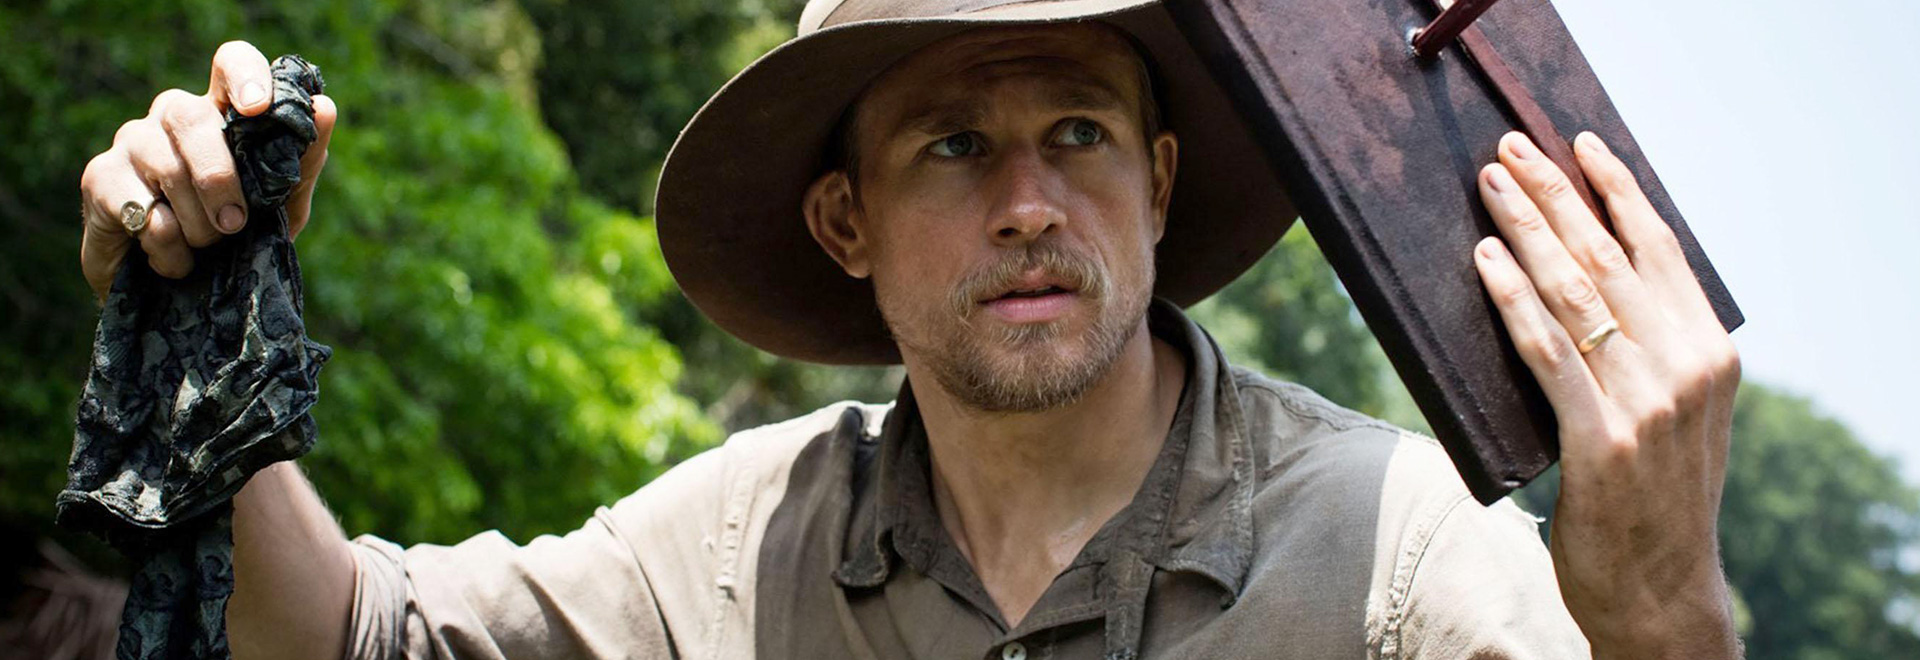 The Lost City Of Z - A true adventure